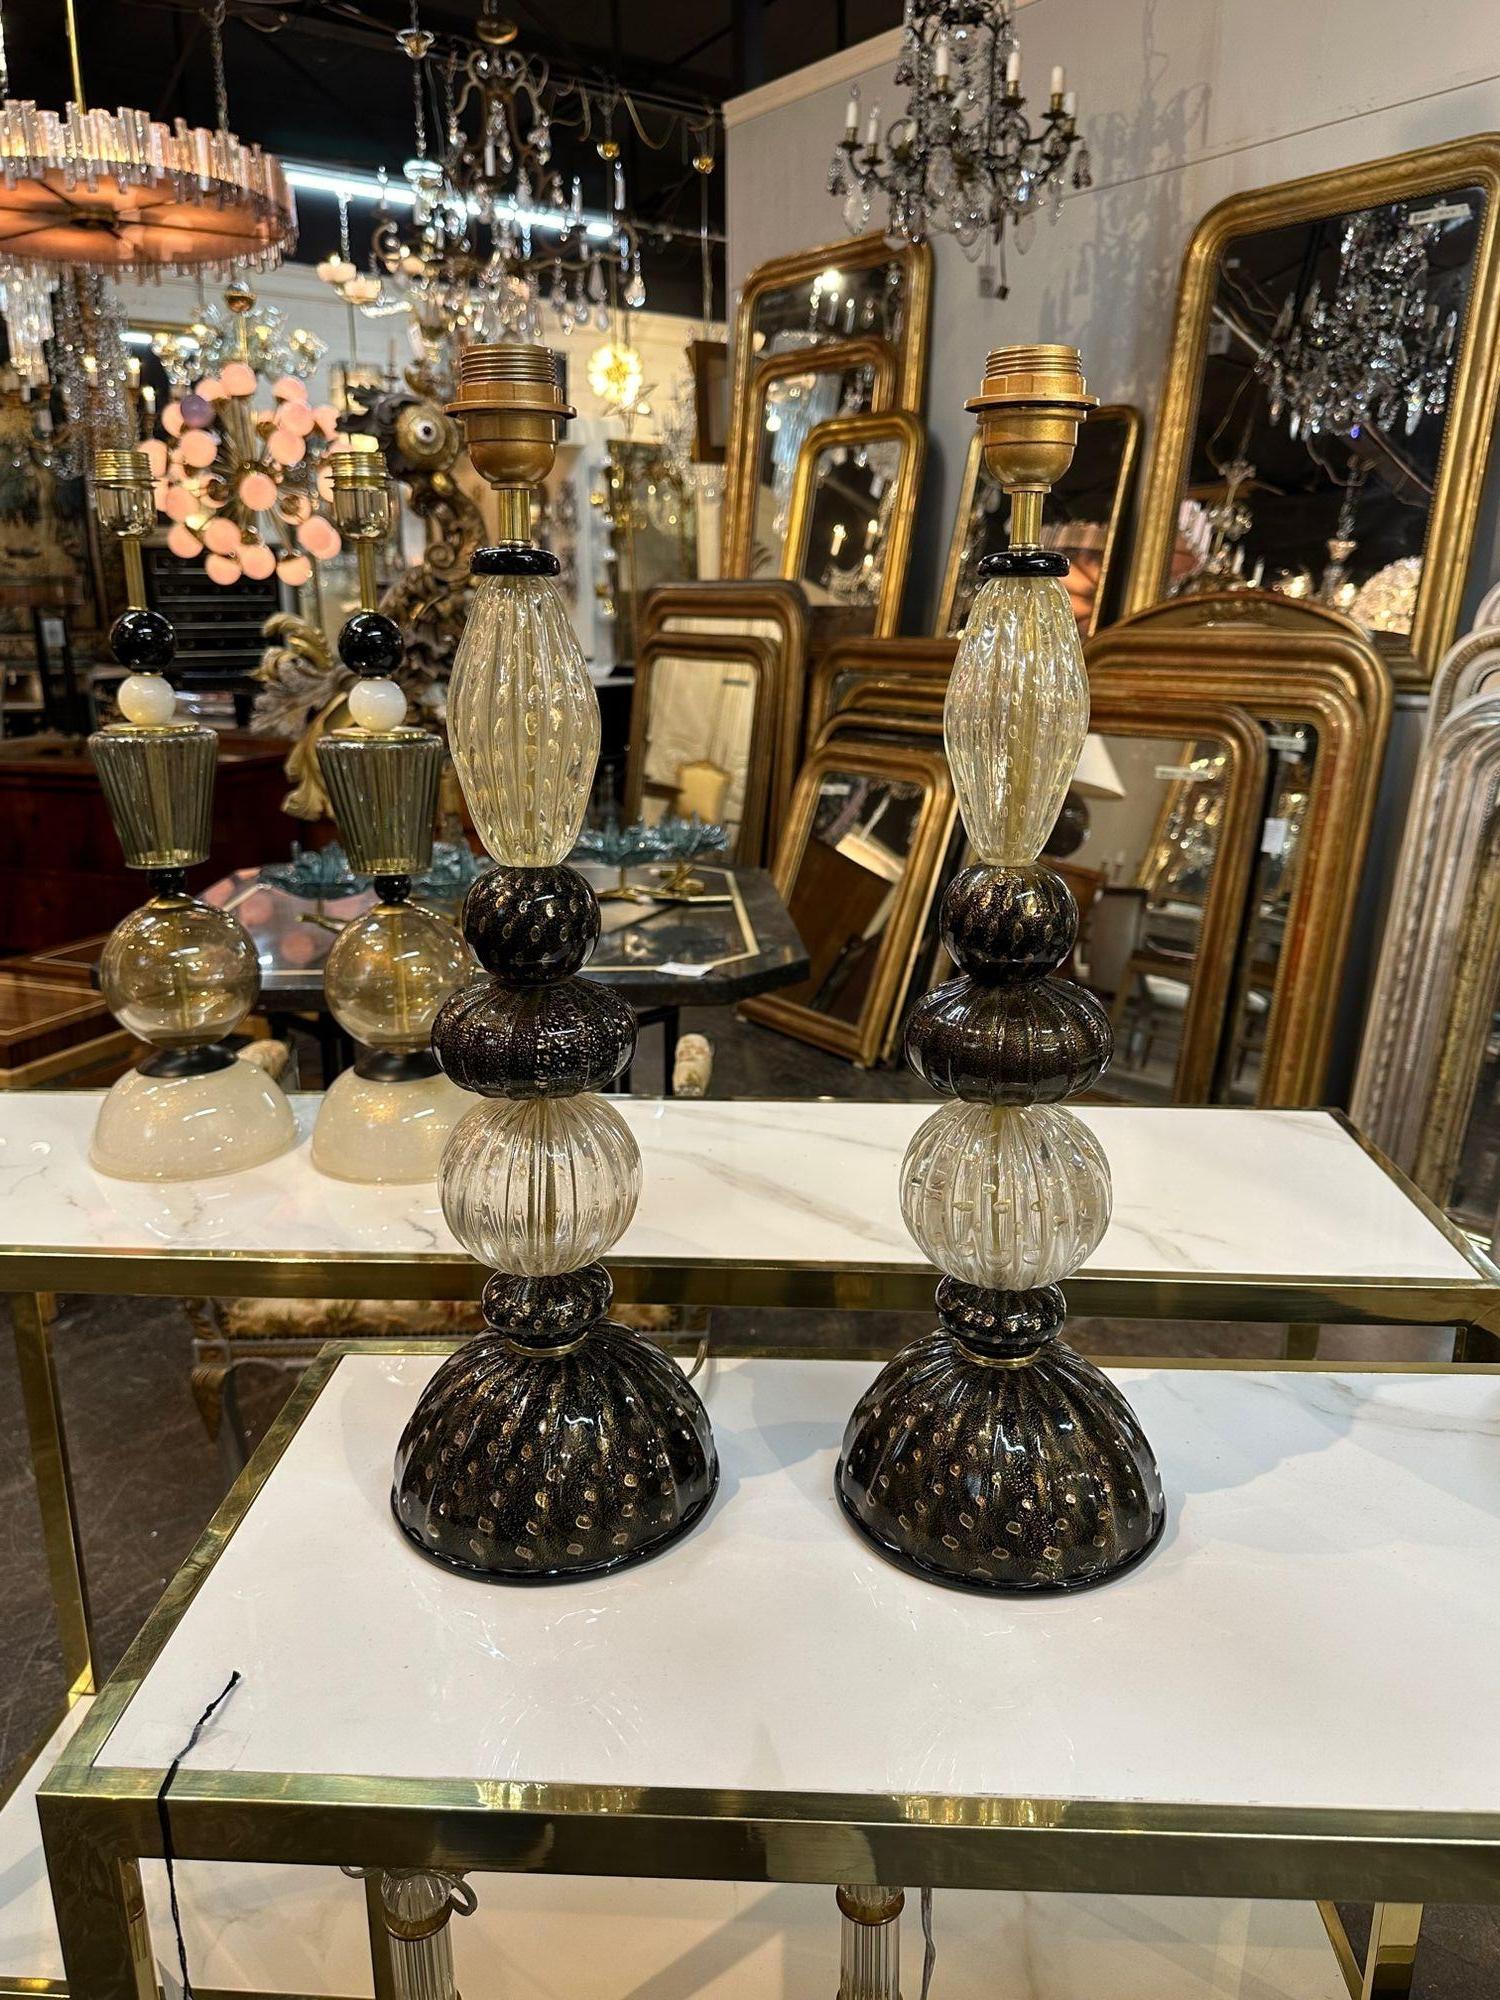 Handsome pair of modern black and gold Murano glass lamps. A beautiful decorative element for a fabulous home!